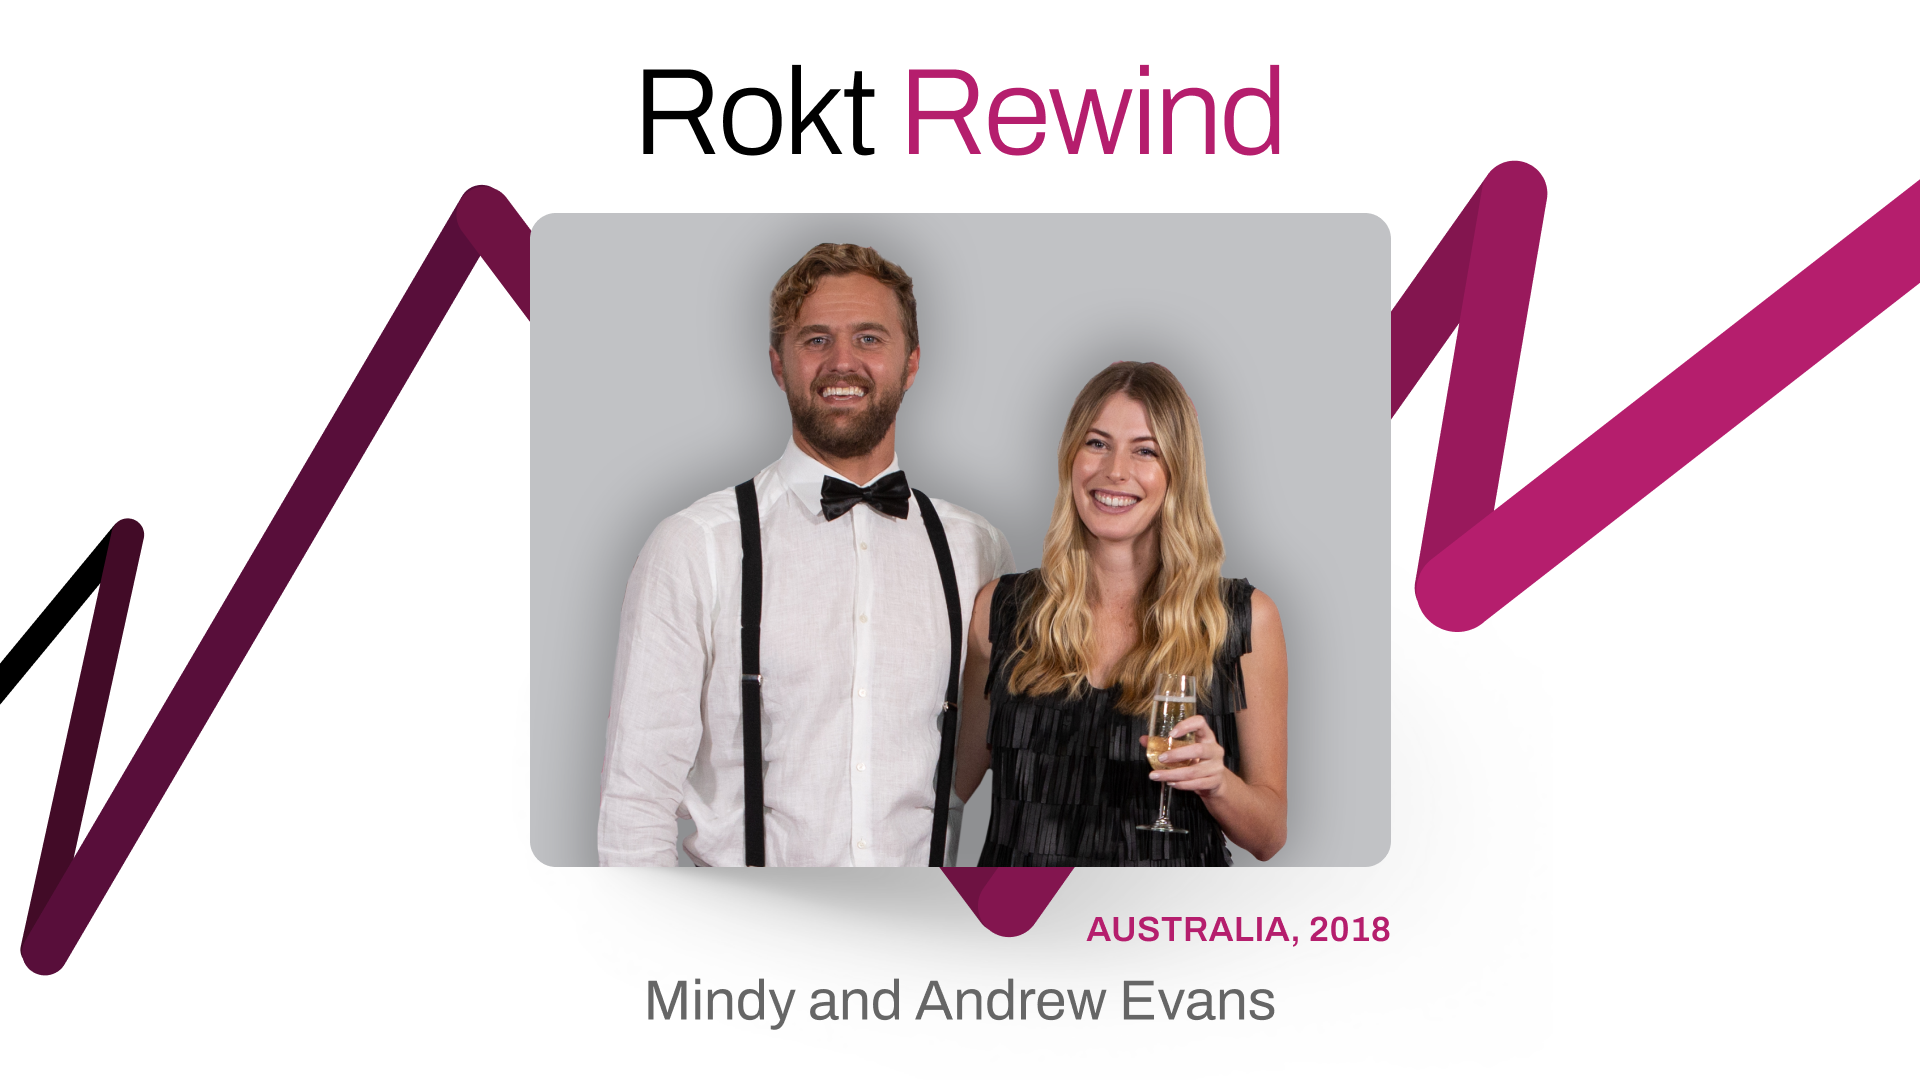 Rokt Rewind with Mindy and Andrew Evans